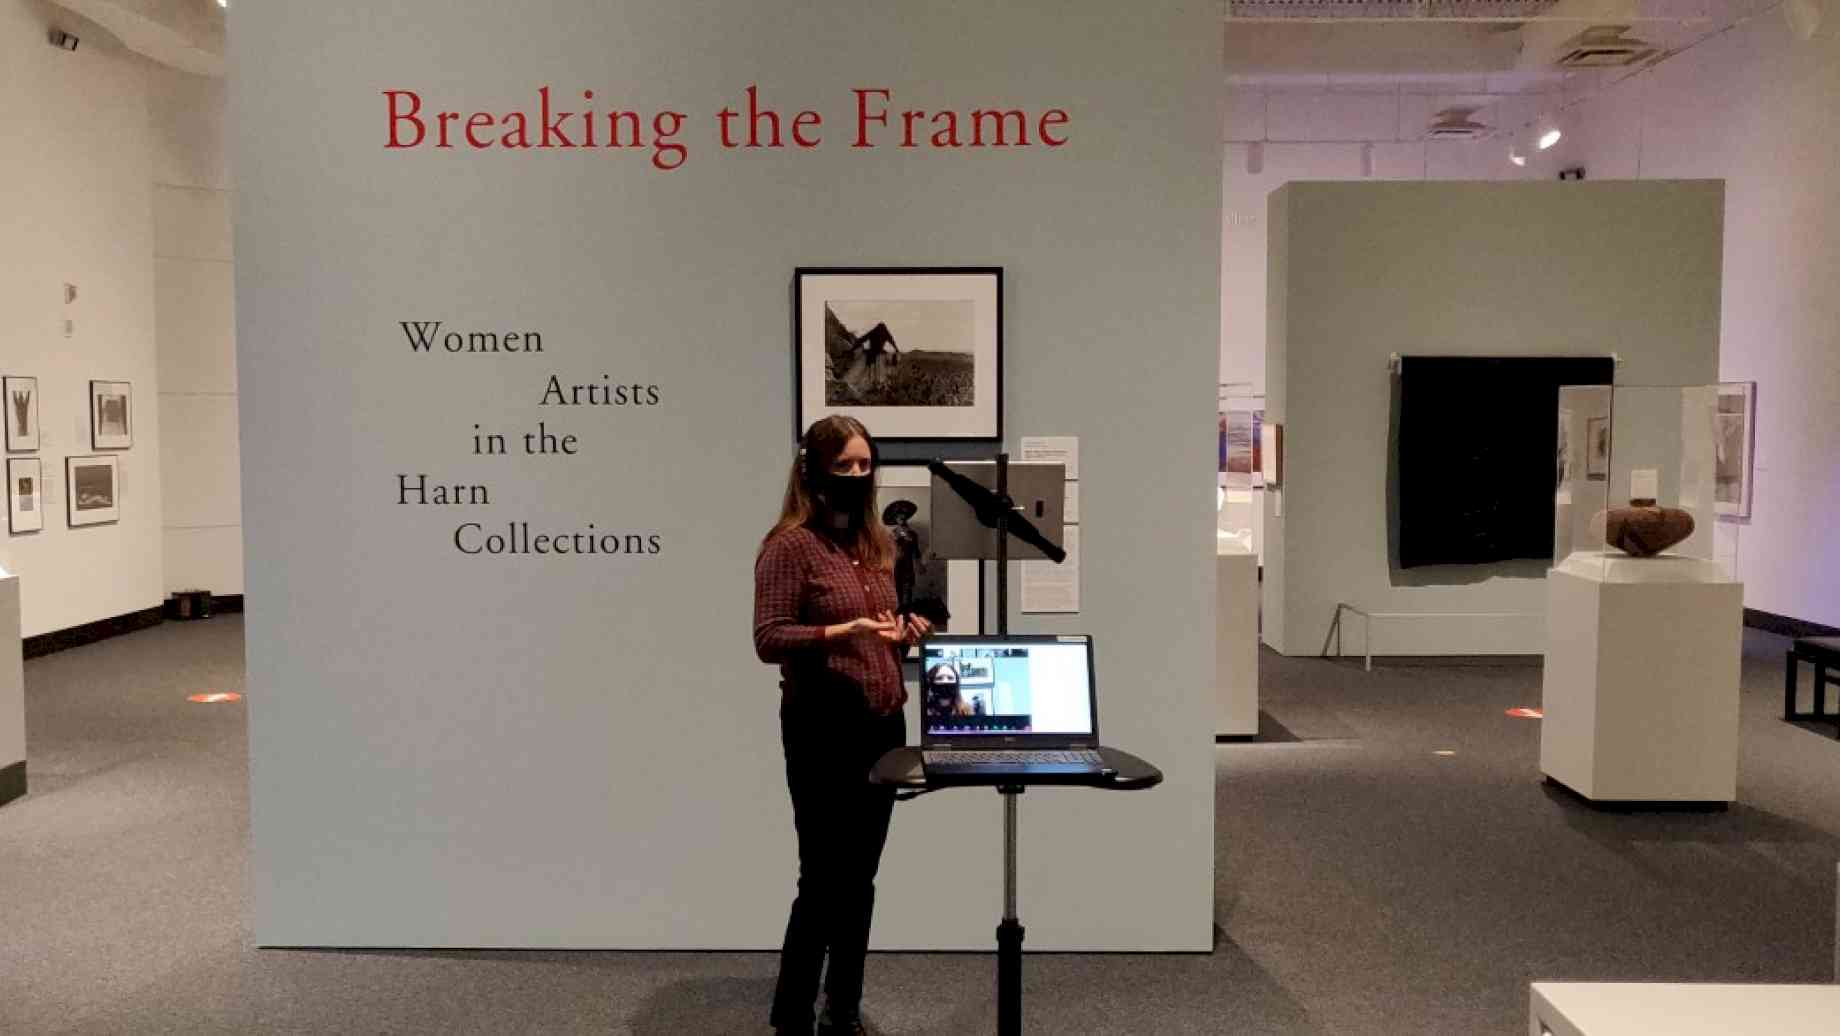 Professor Stanfield-Mazzi teaches a virtual class from the Harn Museum of Art, Fall 2020